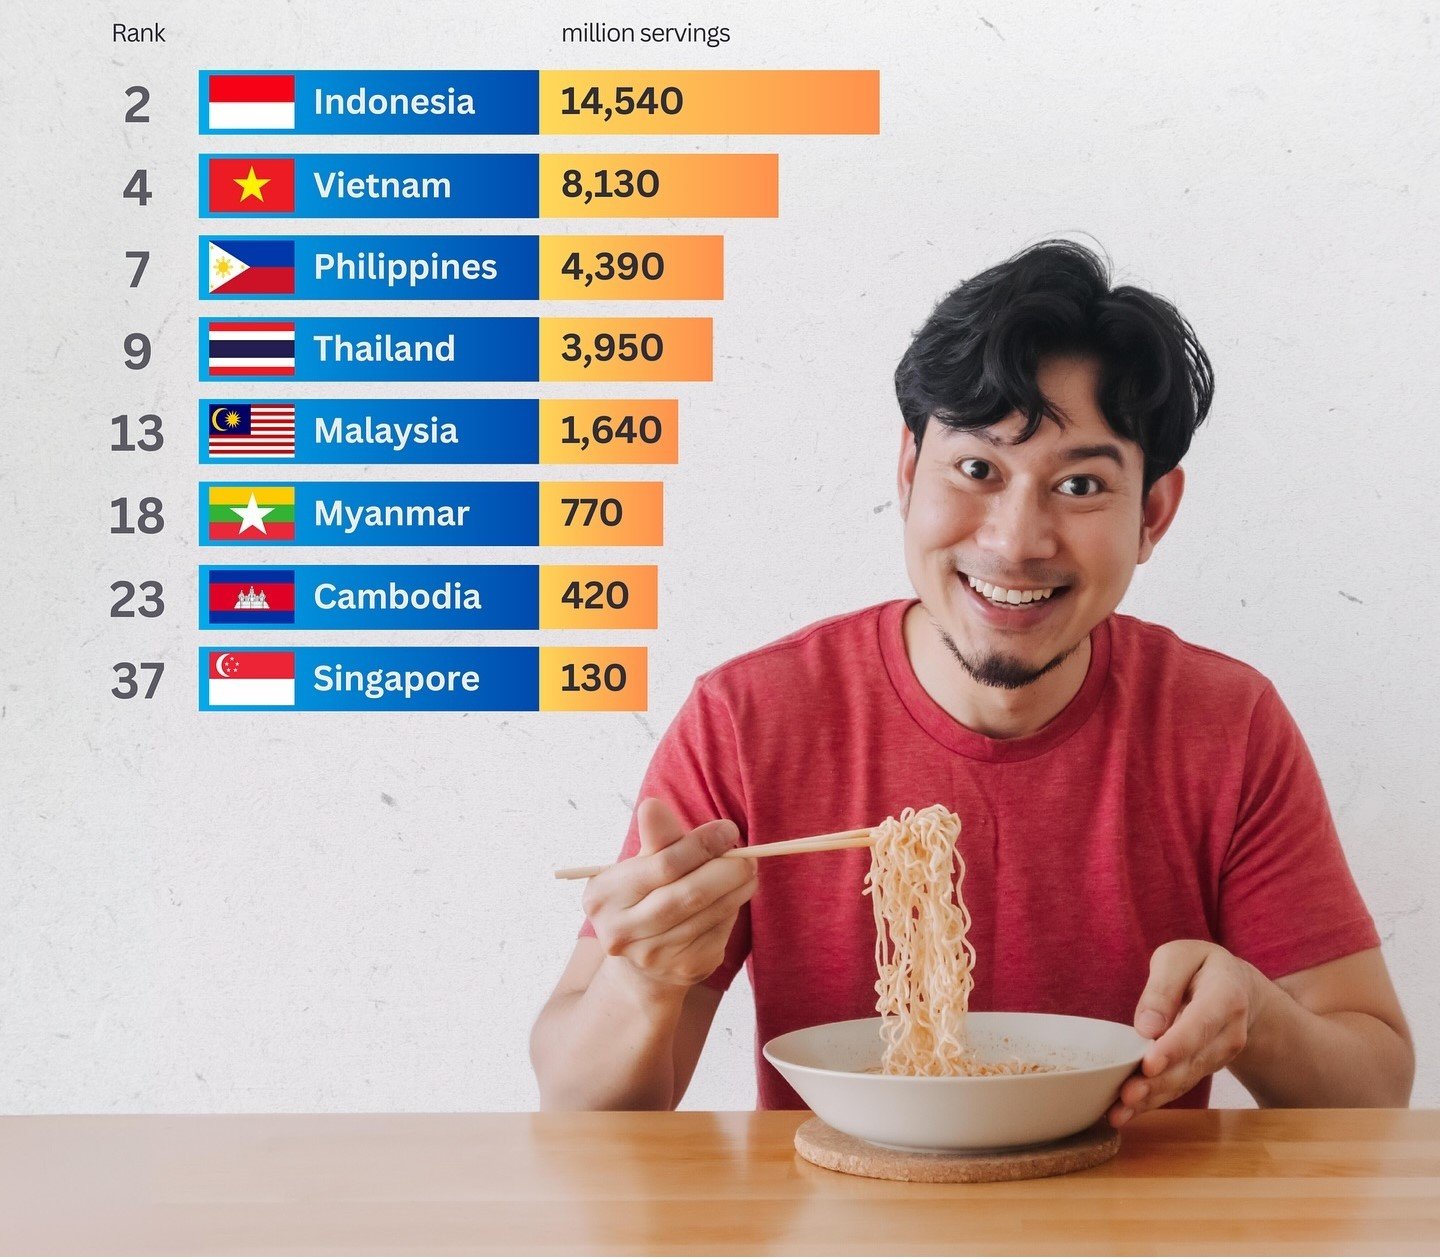 Indonesia leads Southeast Asia in instant noodle consumption.